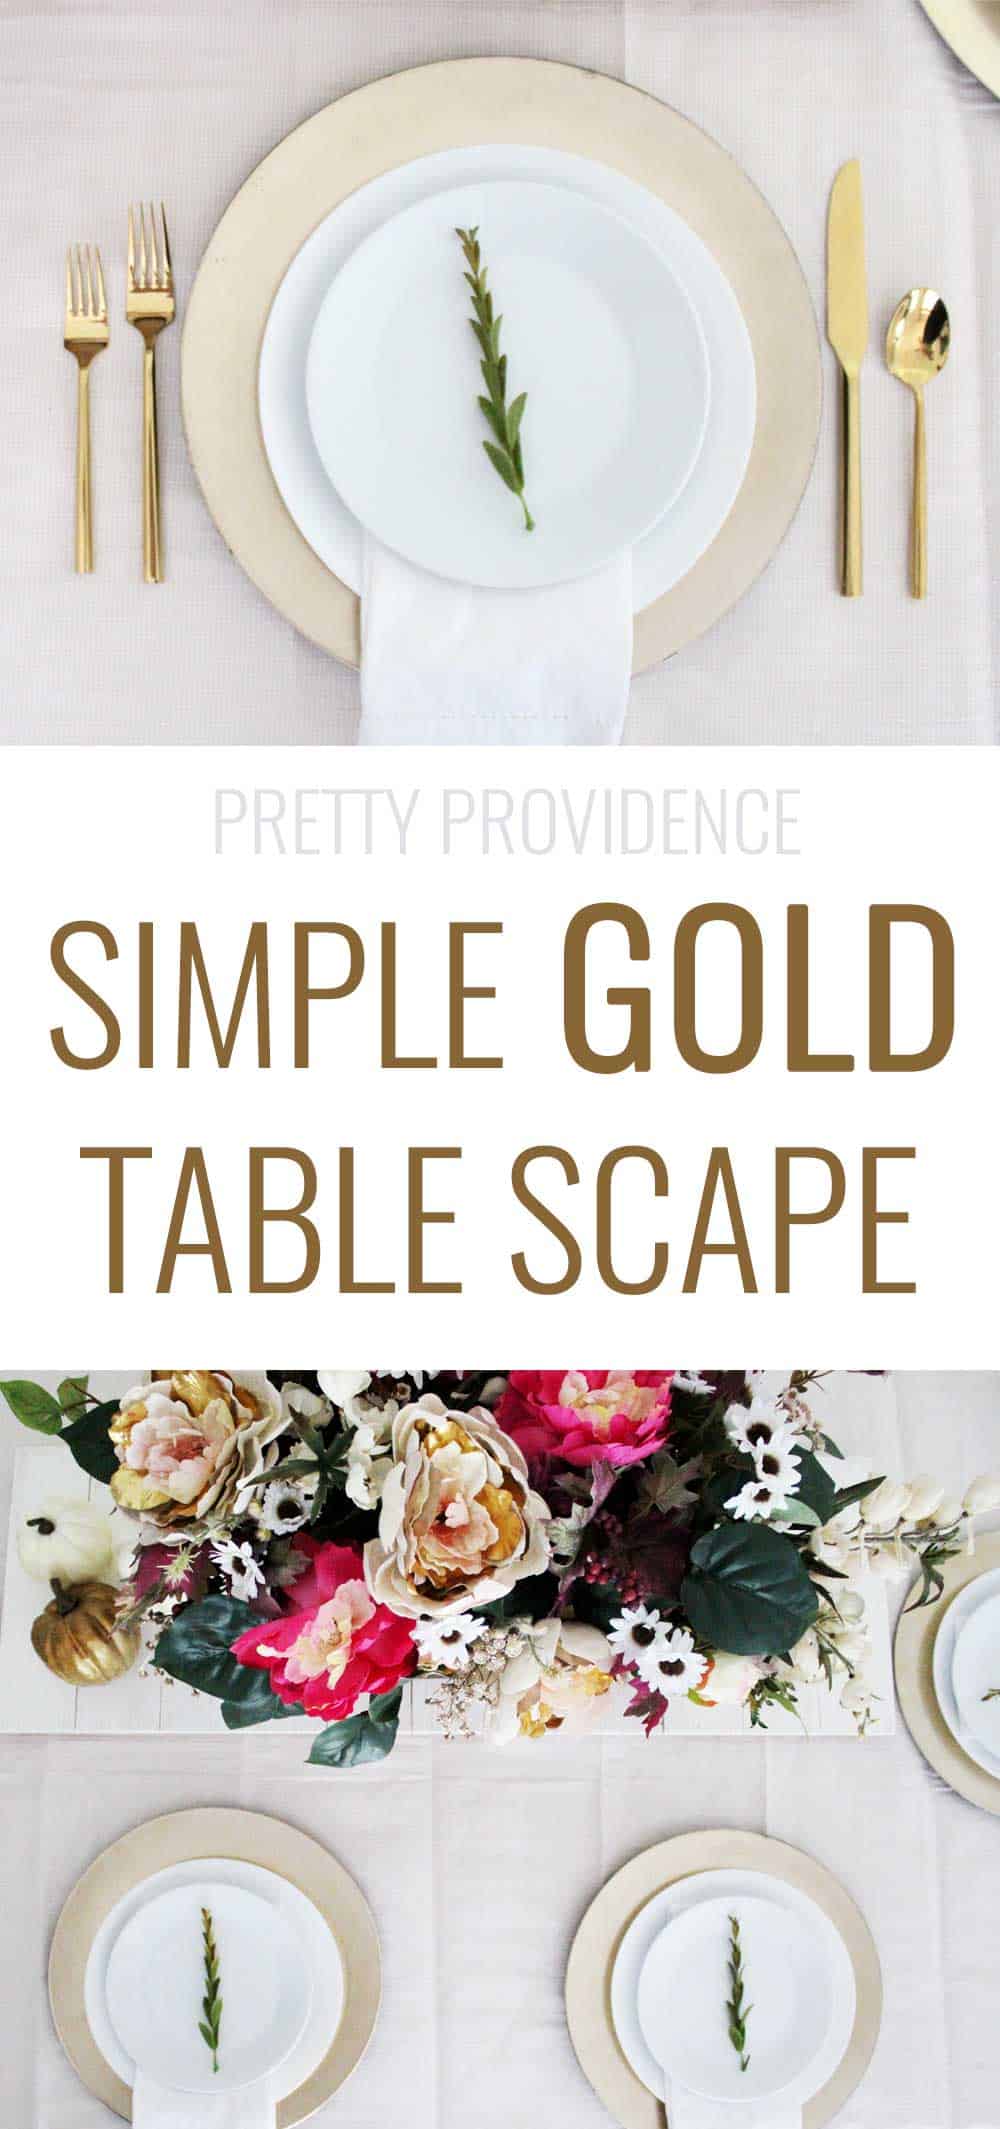 This gold place setting is perfect for the holiday dinner table! Less is more! Gold utensils, white plates, and a gold charger for the win.